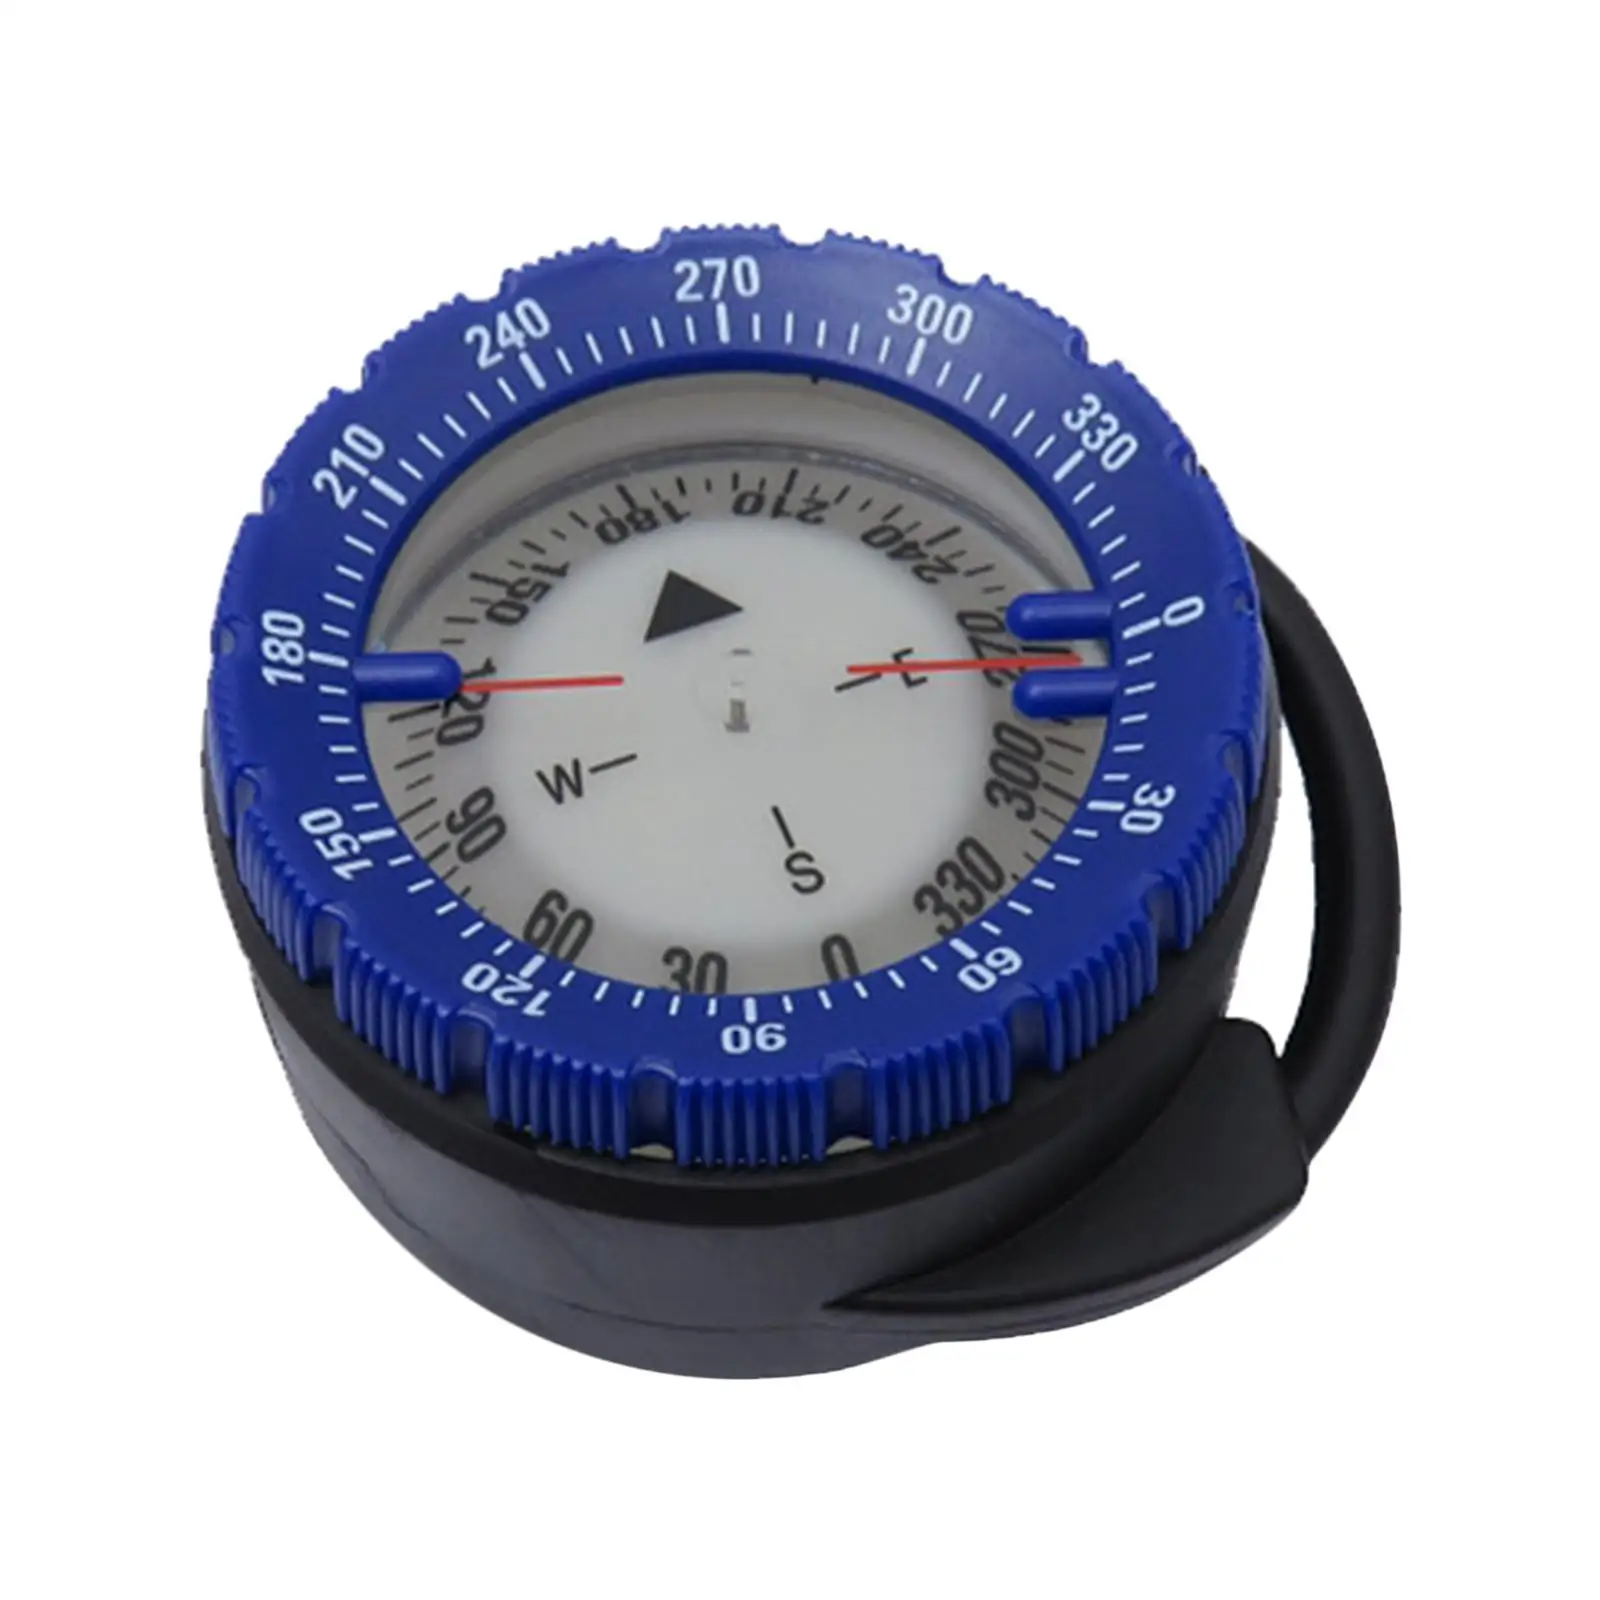 Camping Survival Compass Classic Pocket Compass for Hiking Climbing